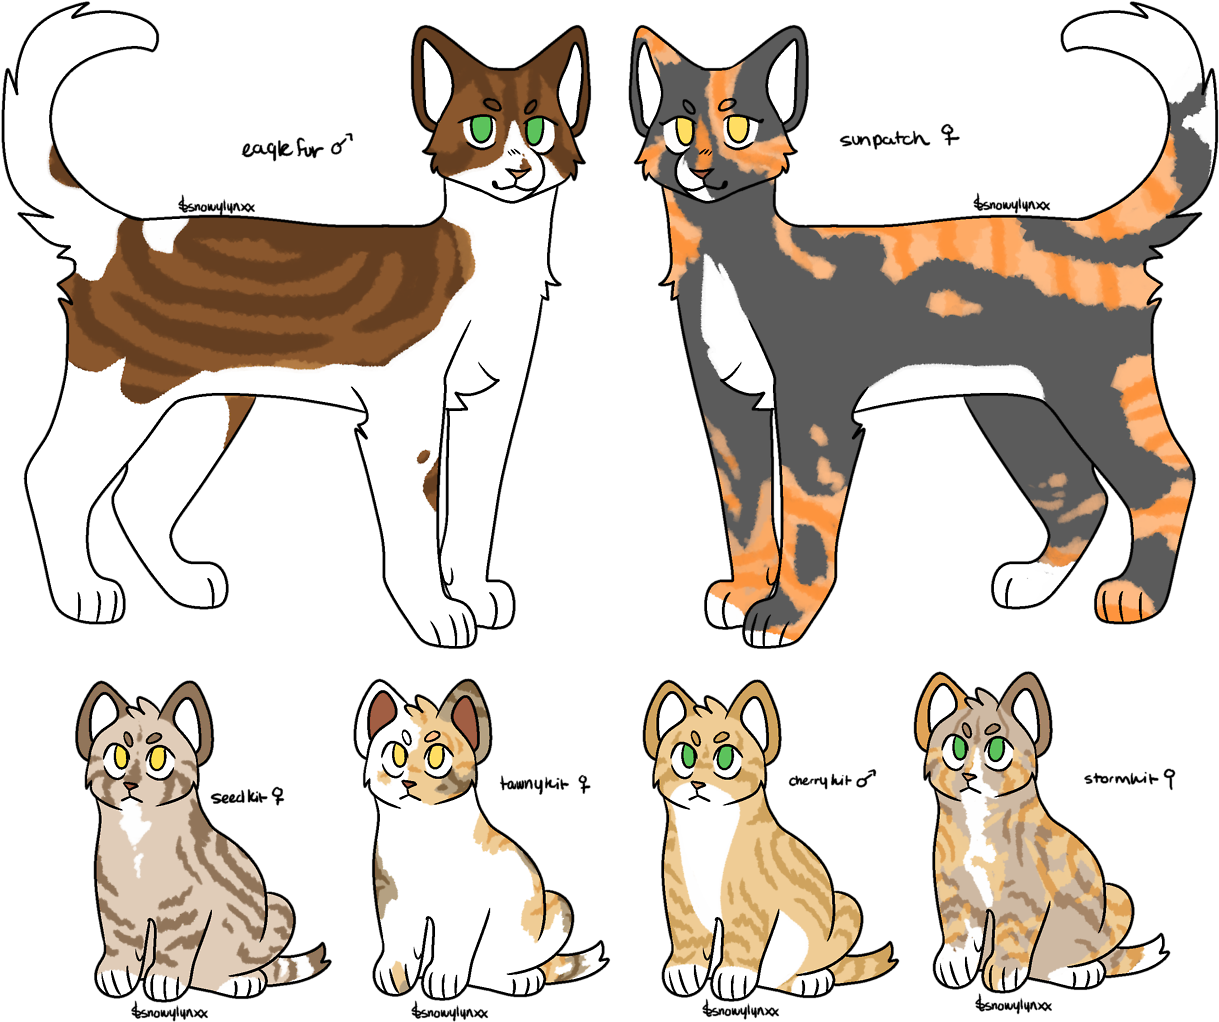 Download Warrior Cats - Warrior Cats Base F2u PNG Image with No ...